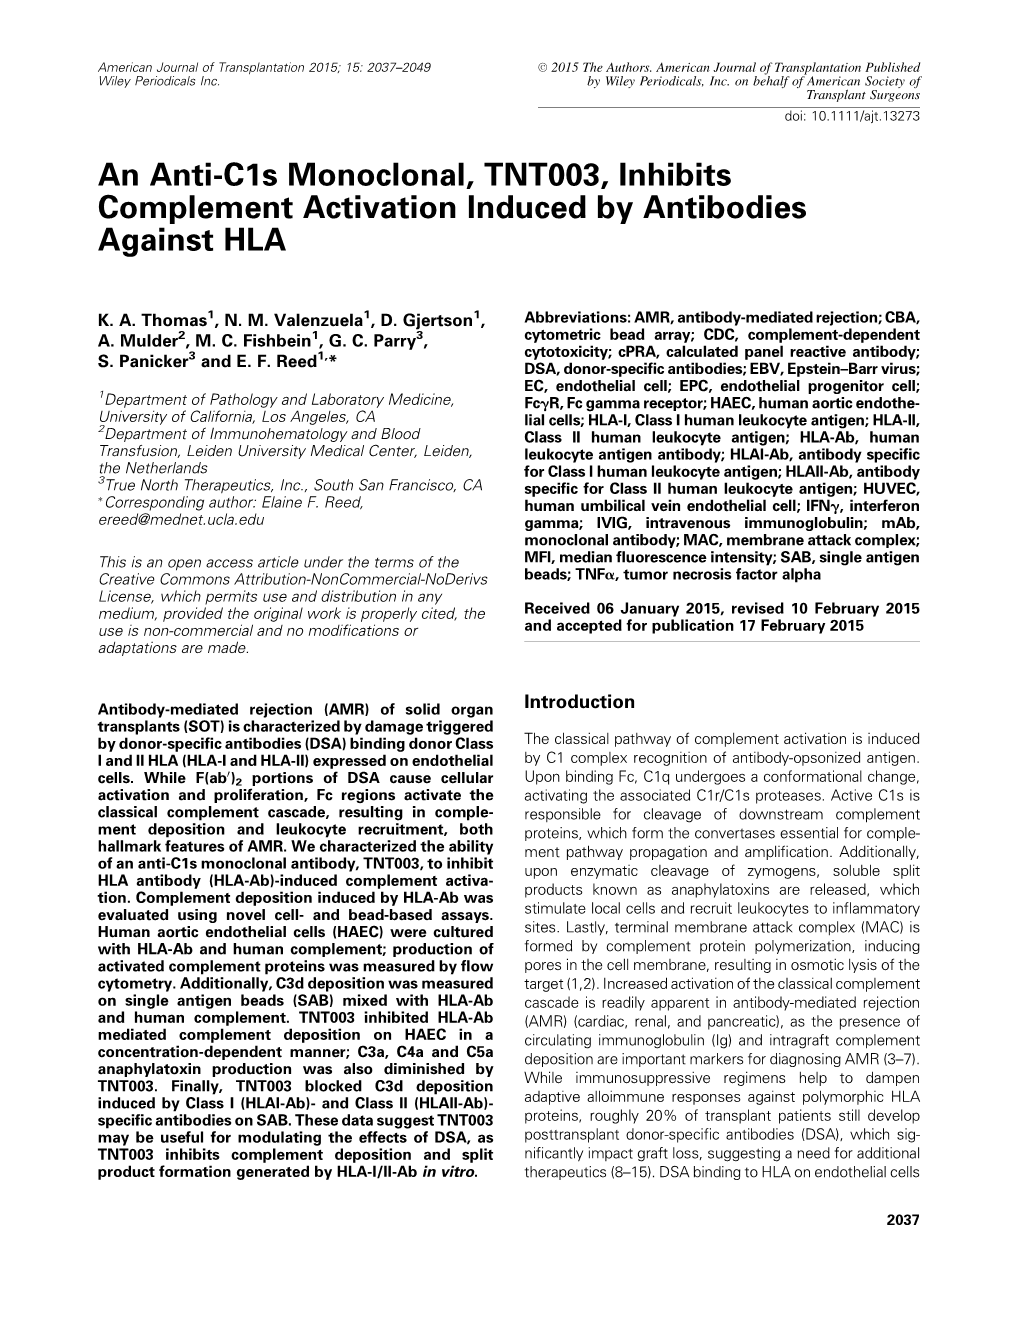 An Anti-C1s Monoclonal, TNT003, Inhibits Complement Activation Induced by Antibodies Against HLA